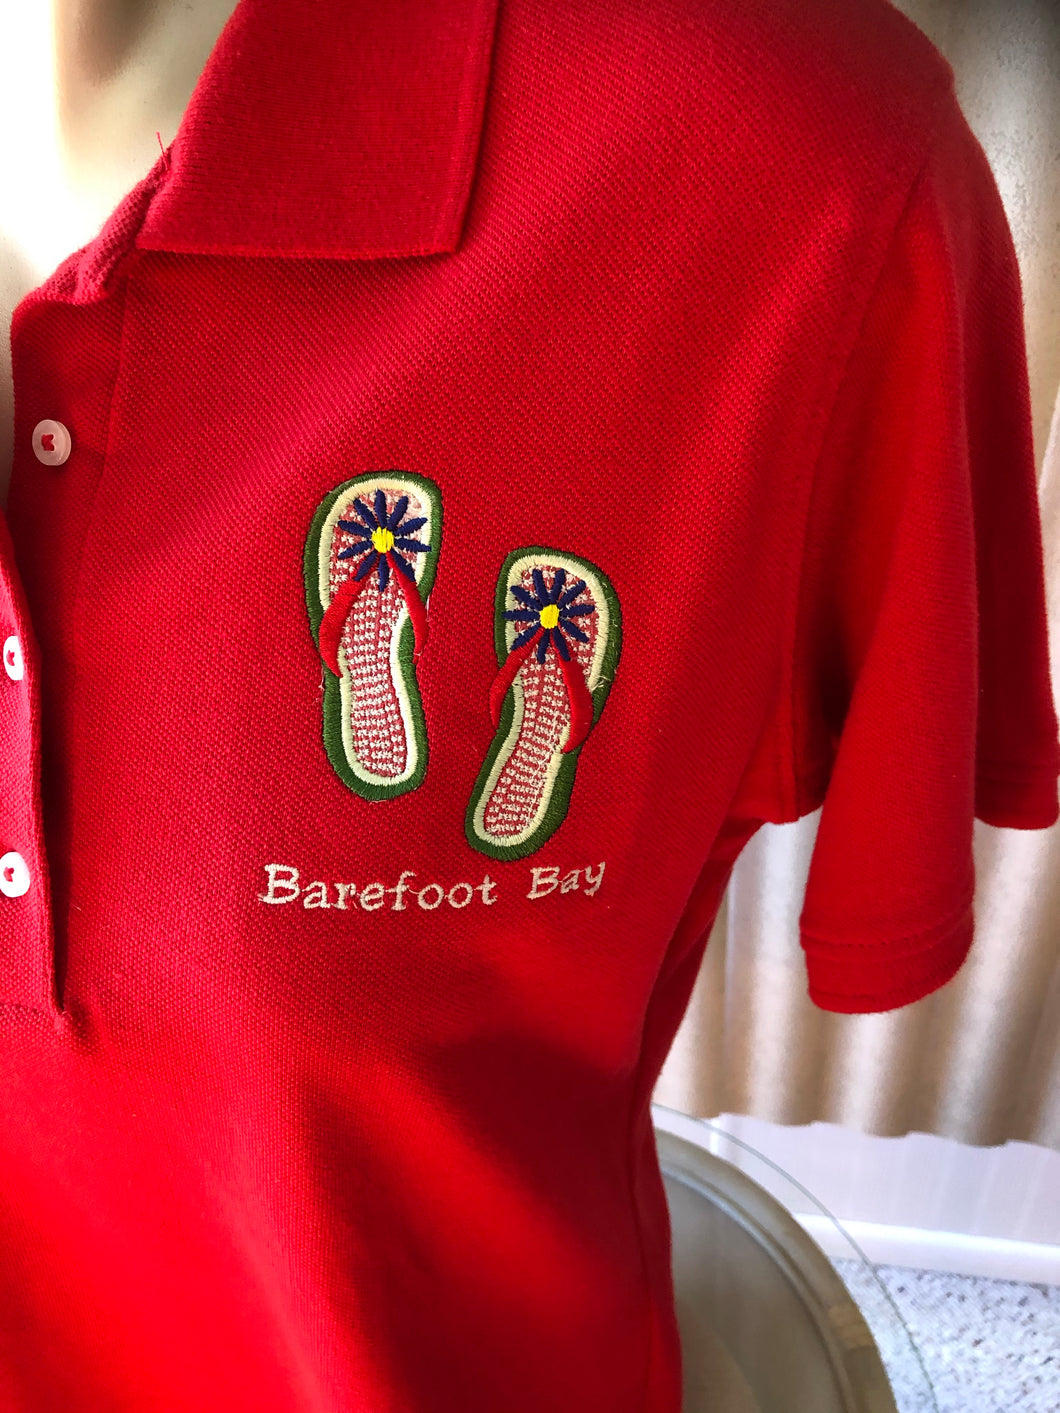 Barefoot Bay Polo Red size Medium with flip flops